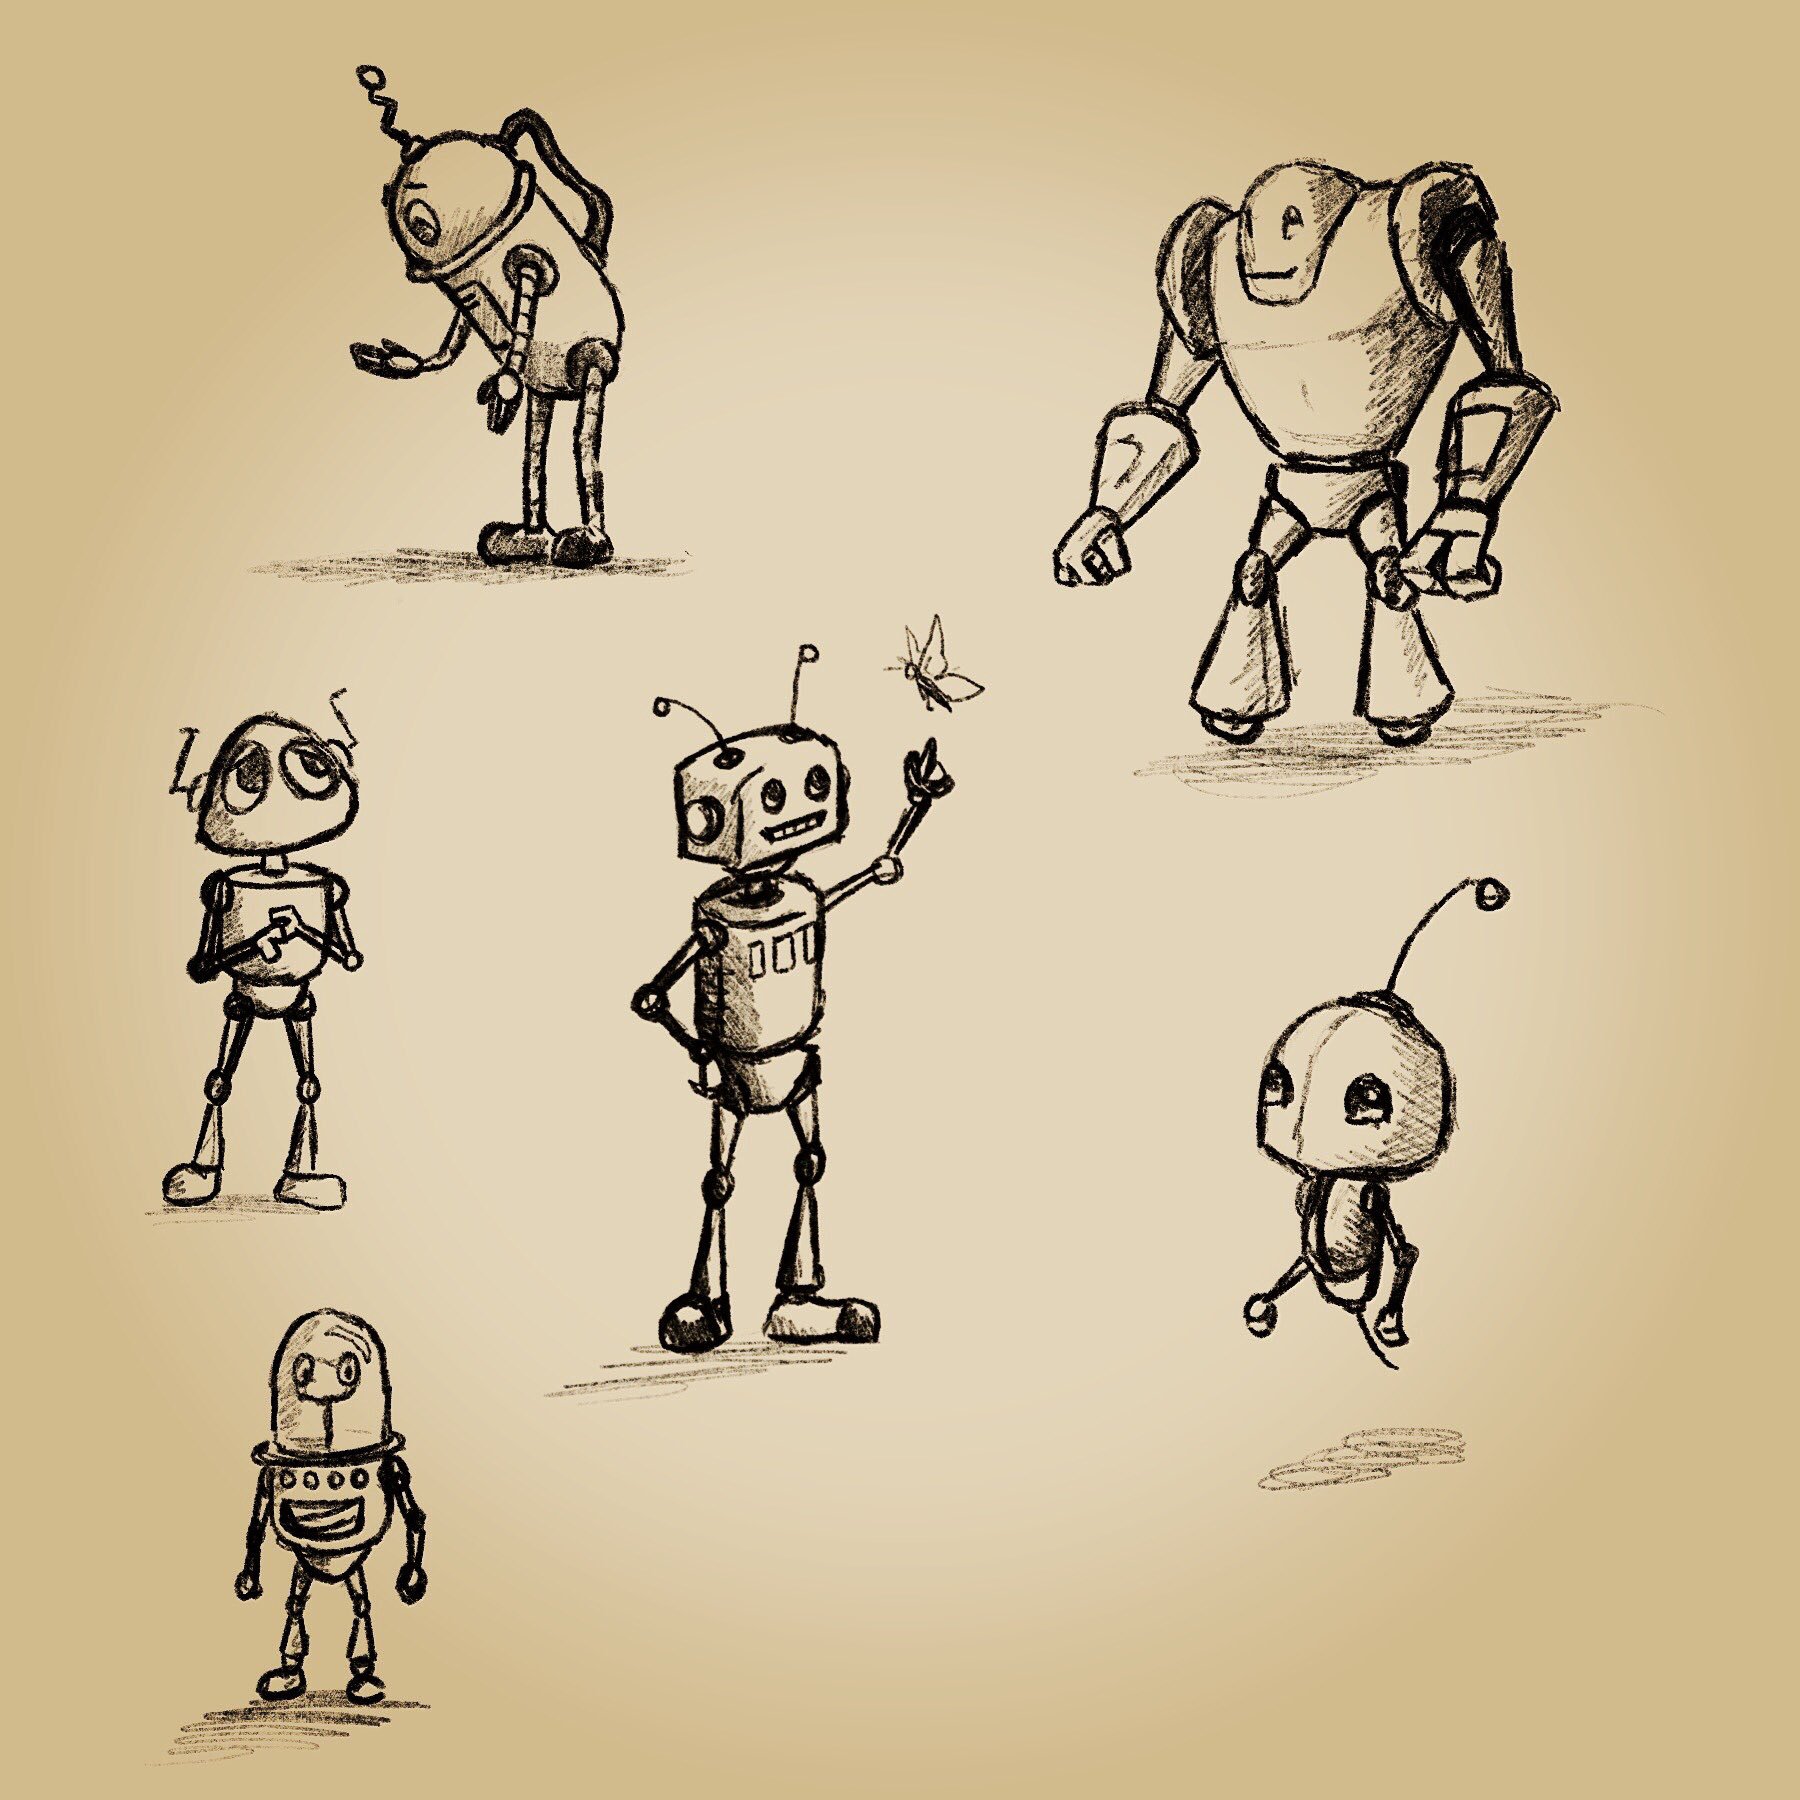 Barrows on Twitter: "Messing around with some robot designs. Which is your favorite? #drawing #digital #digitalart #robot #robots #design #ipad # sketch #sketches #sketching #drawings #cute https://t.co/2RcMnIYFRx" / Twitter